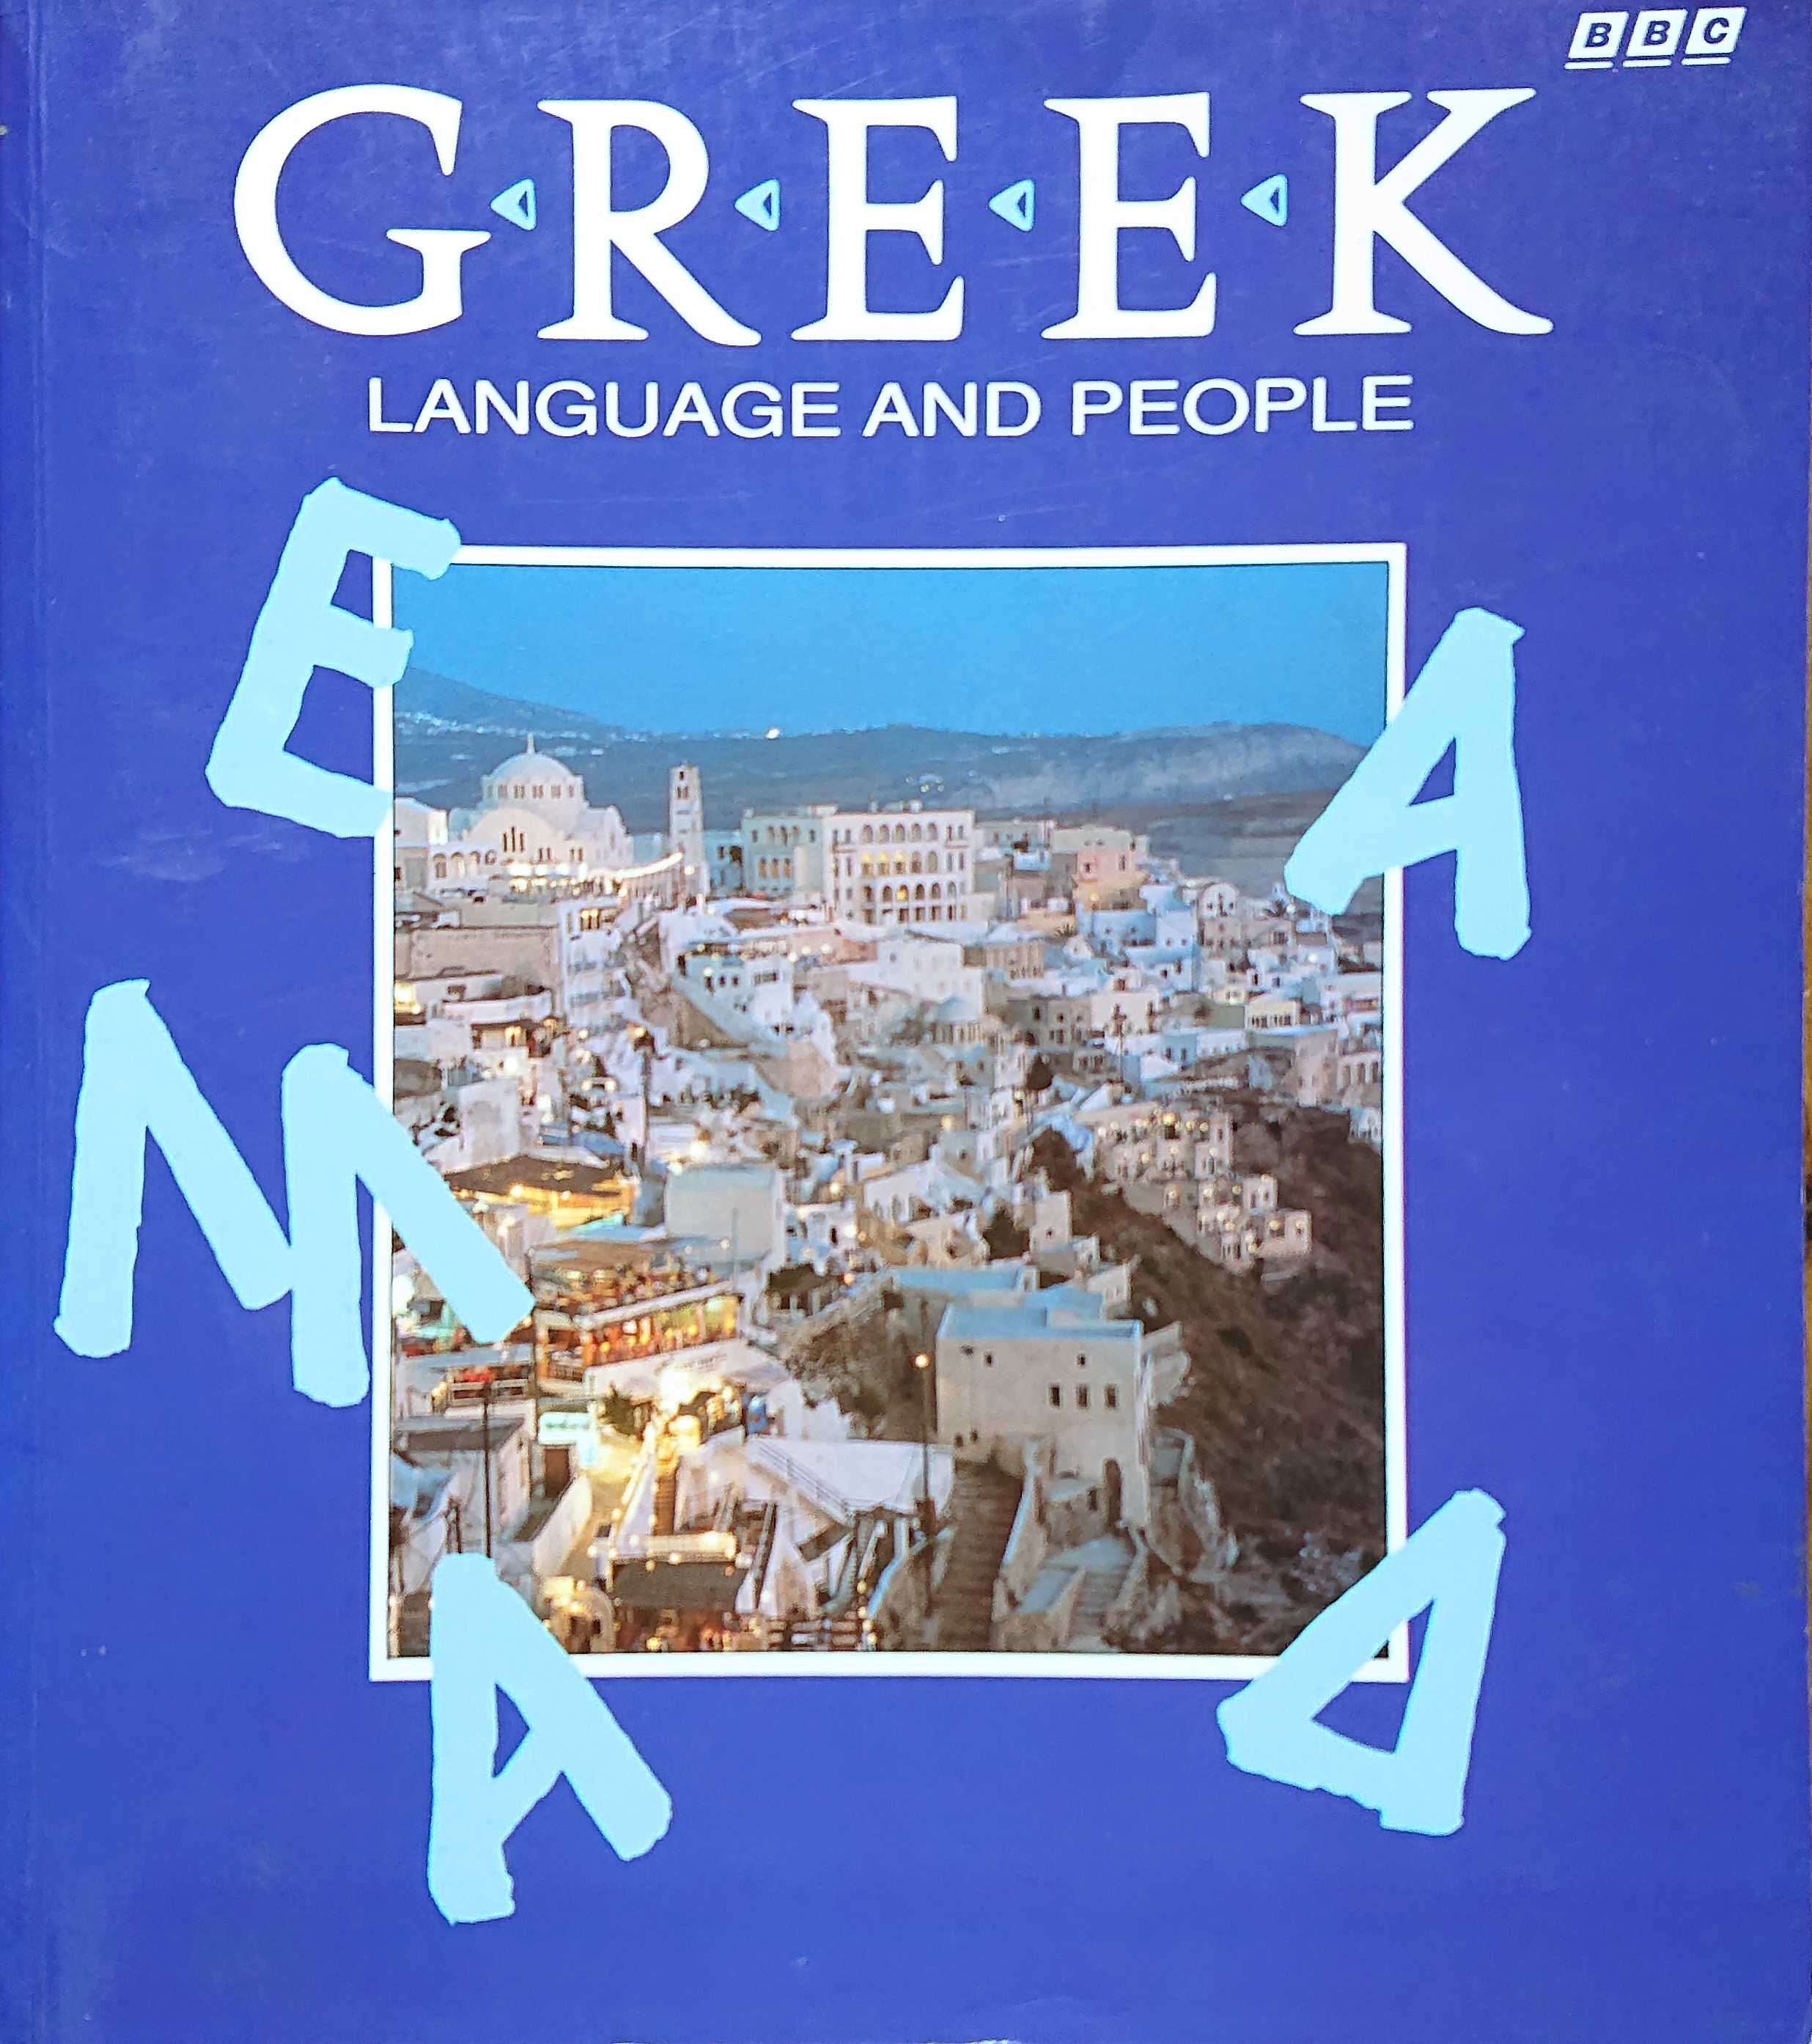 Picture of ISBN 0-563-16575-8 Greek language and people by artist David A. Hardy from the BBC books - Records and Tapes library